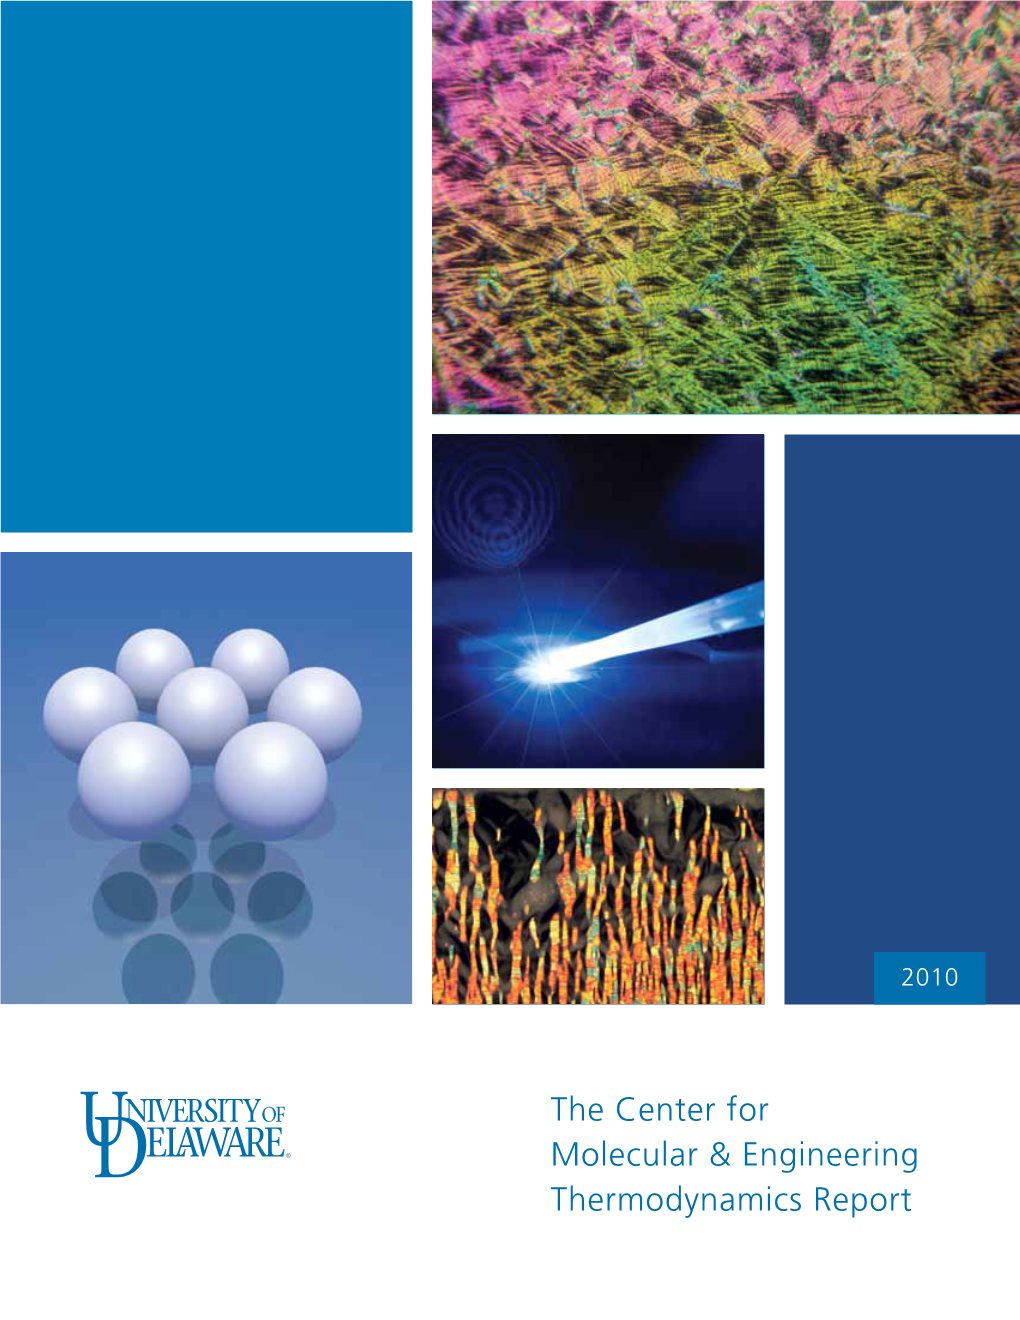 The Center for Molecular & Engineering Thermodynamics Report